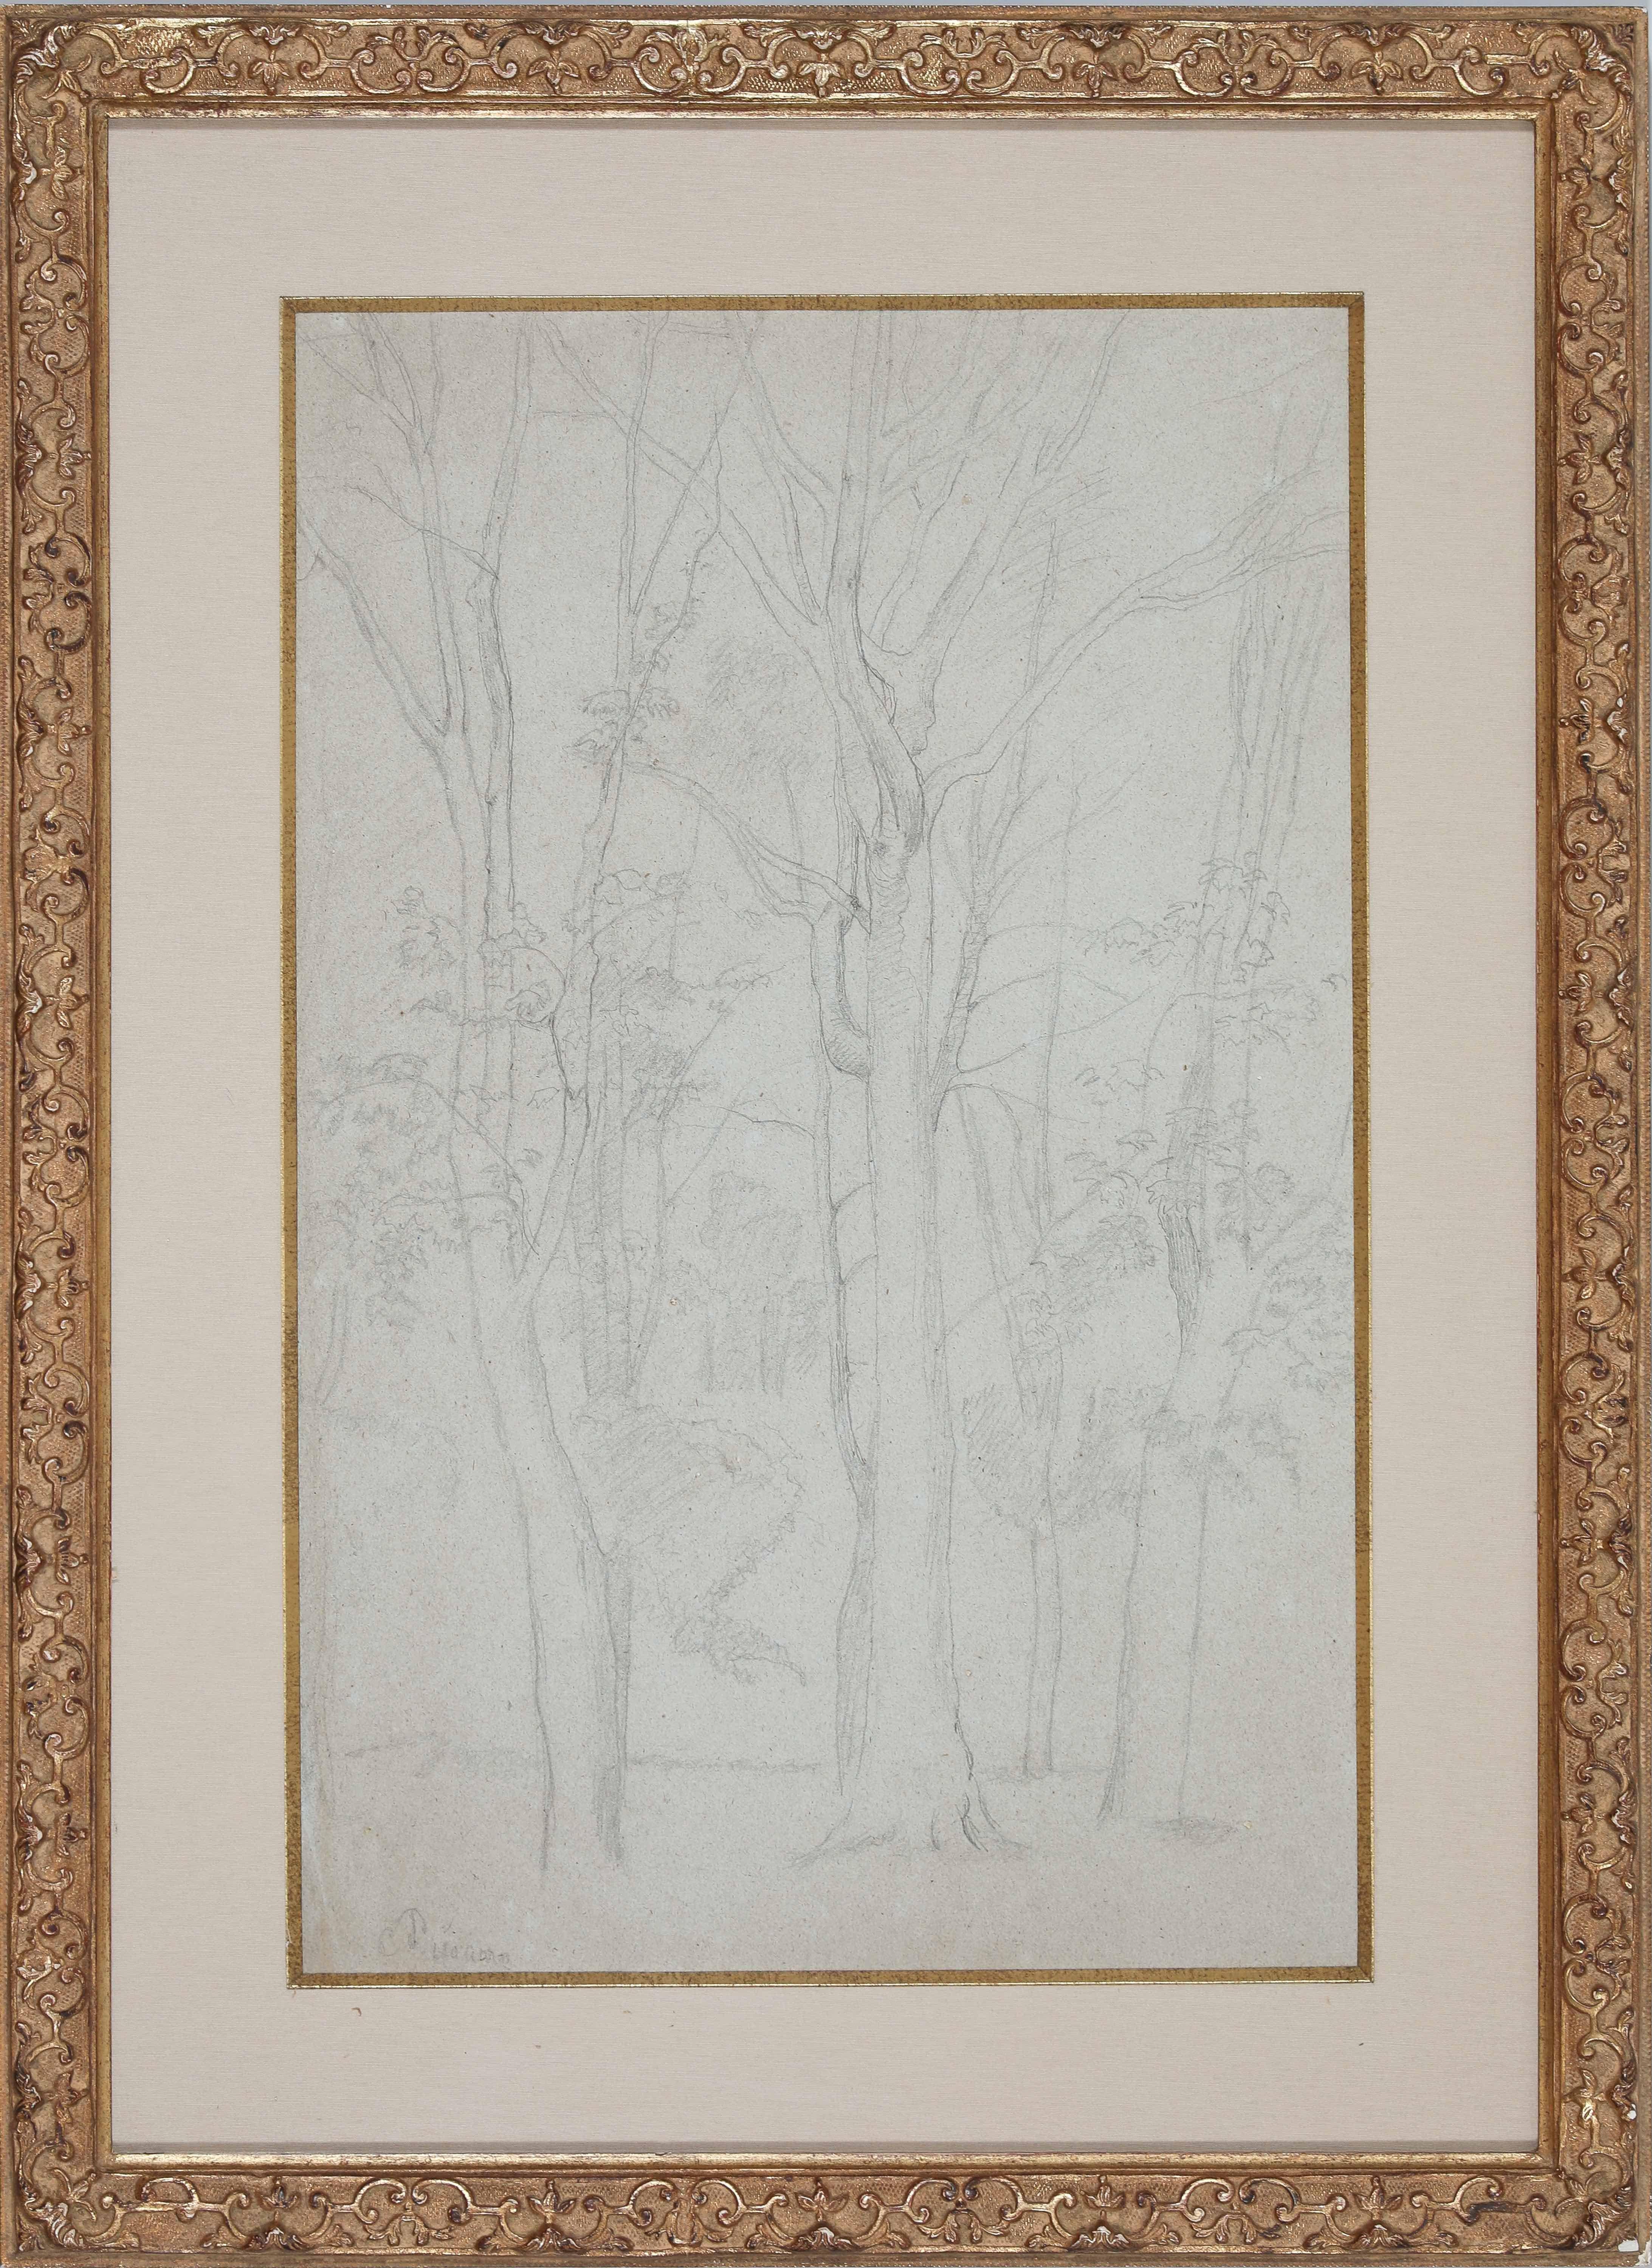 Arbres by Camille Pissarro - Pencil on paper For Sale 1